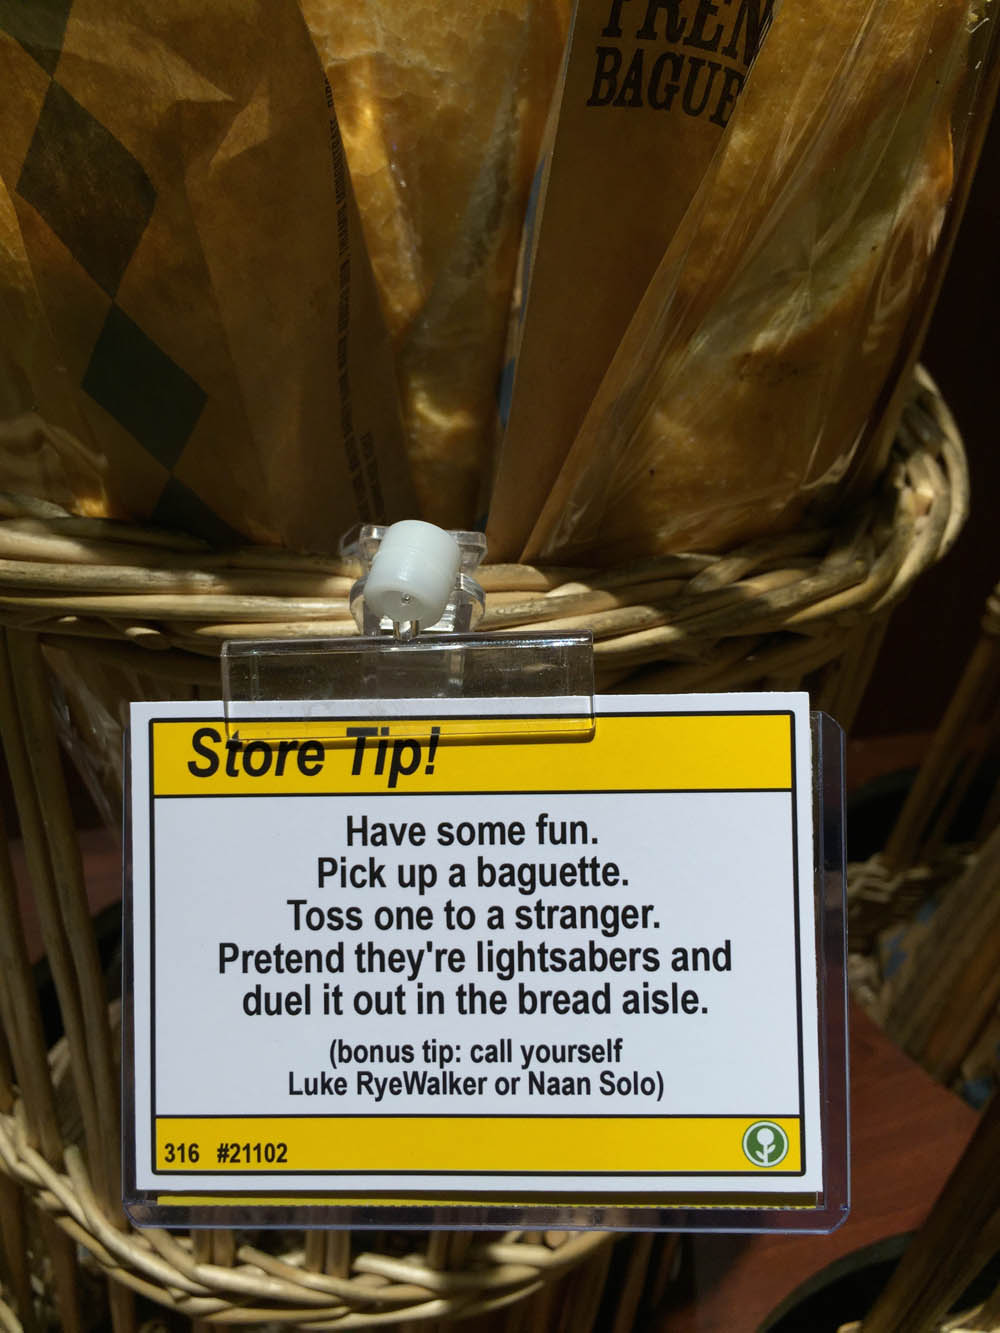 funny store tips - Bagur Store Tip! Have some fun. Pick up a baguette. Toss one to a stranger. Pretend they're lightsabers and duel it out in the bread aisle. bonus tip call yourself Luke RyeWalker or Naan Solo 316